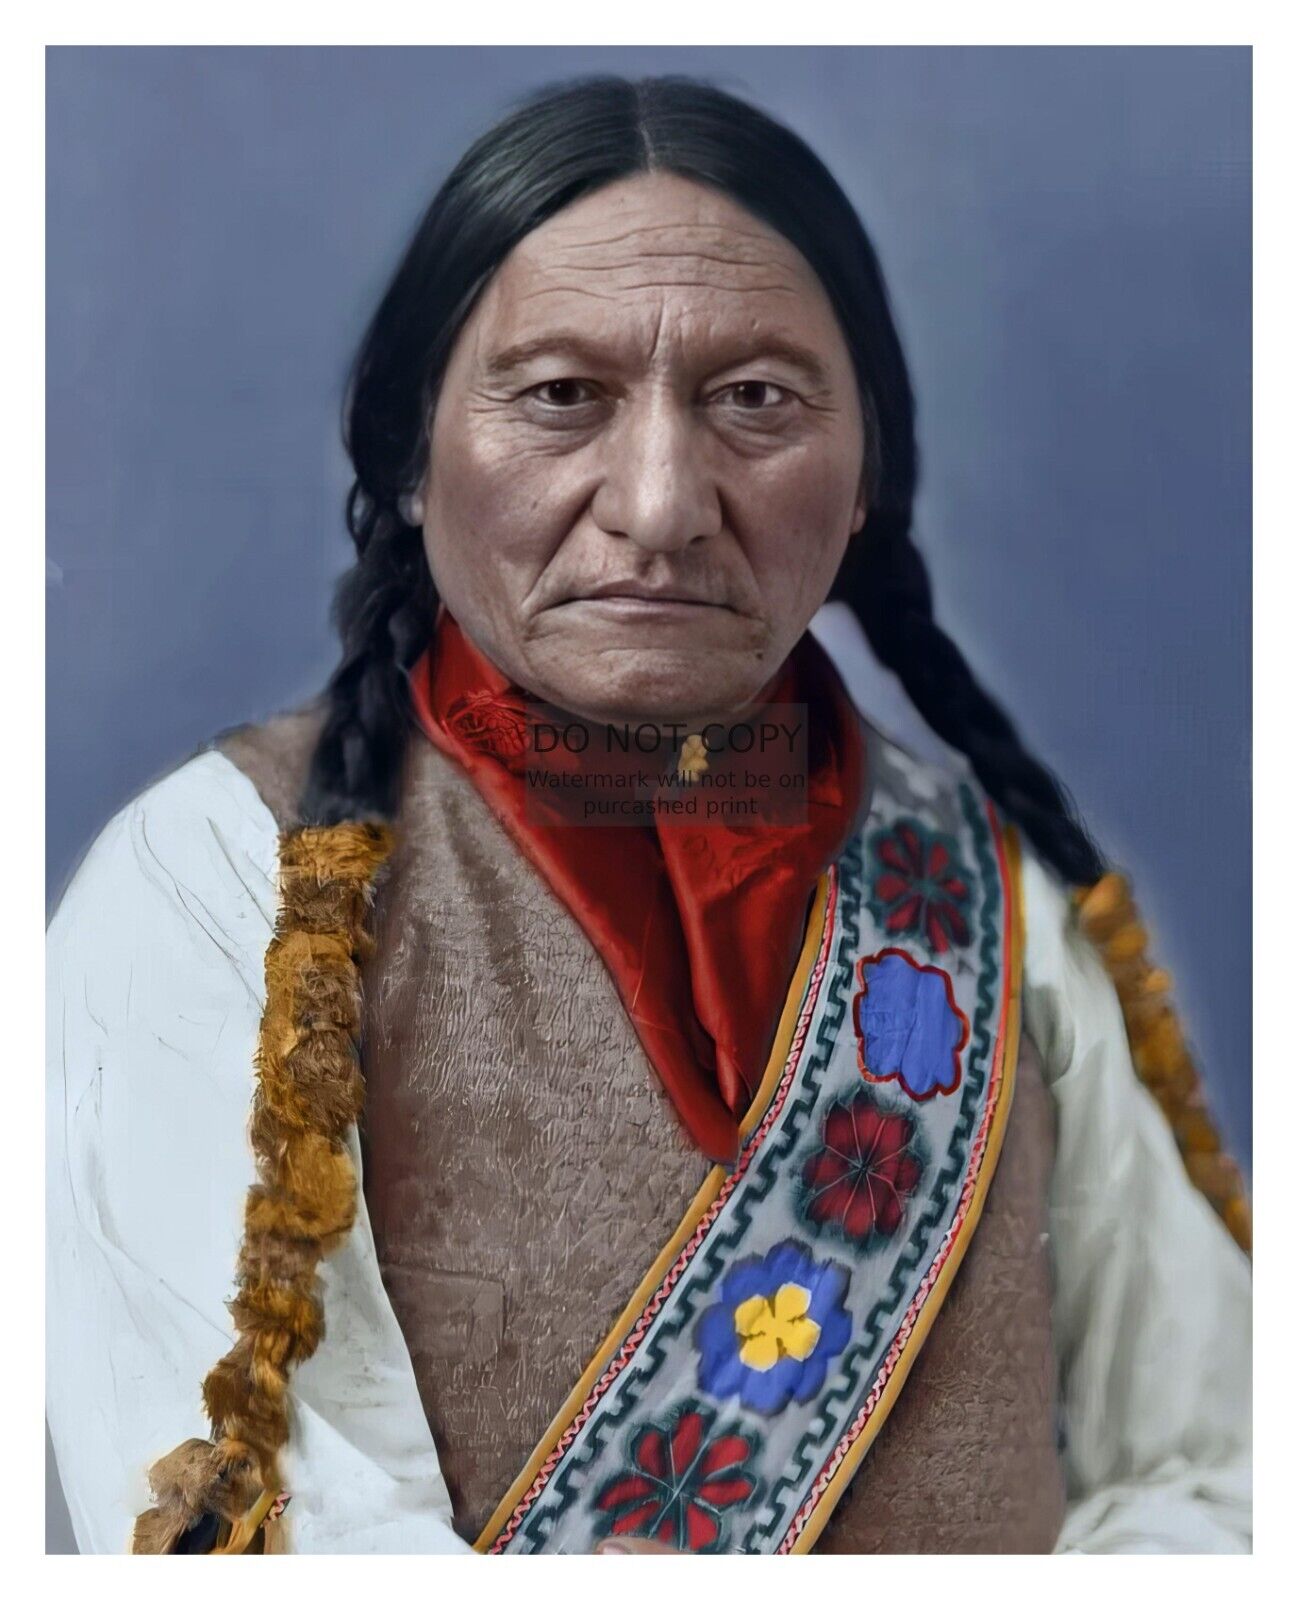 SITTING BULL NATIVE AMERICAN CHIEF COLORIZED 8X10 PHOTO